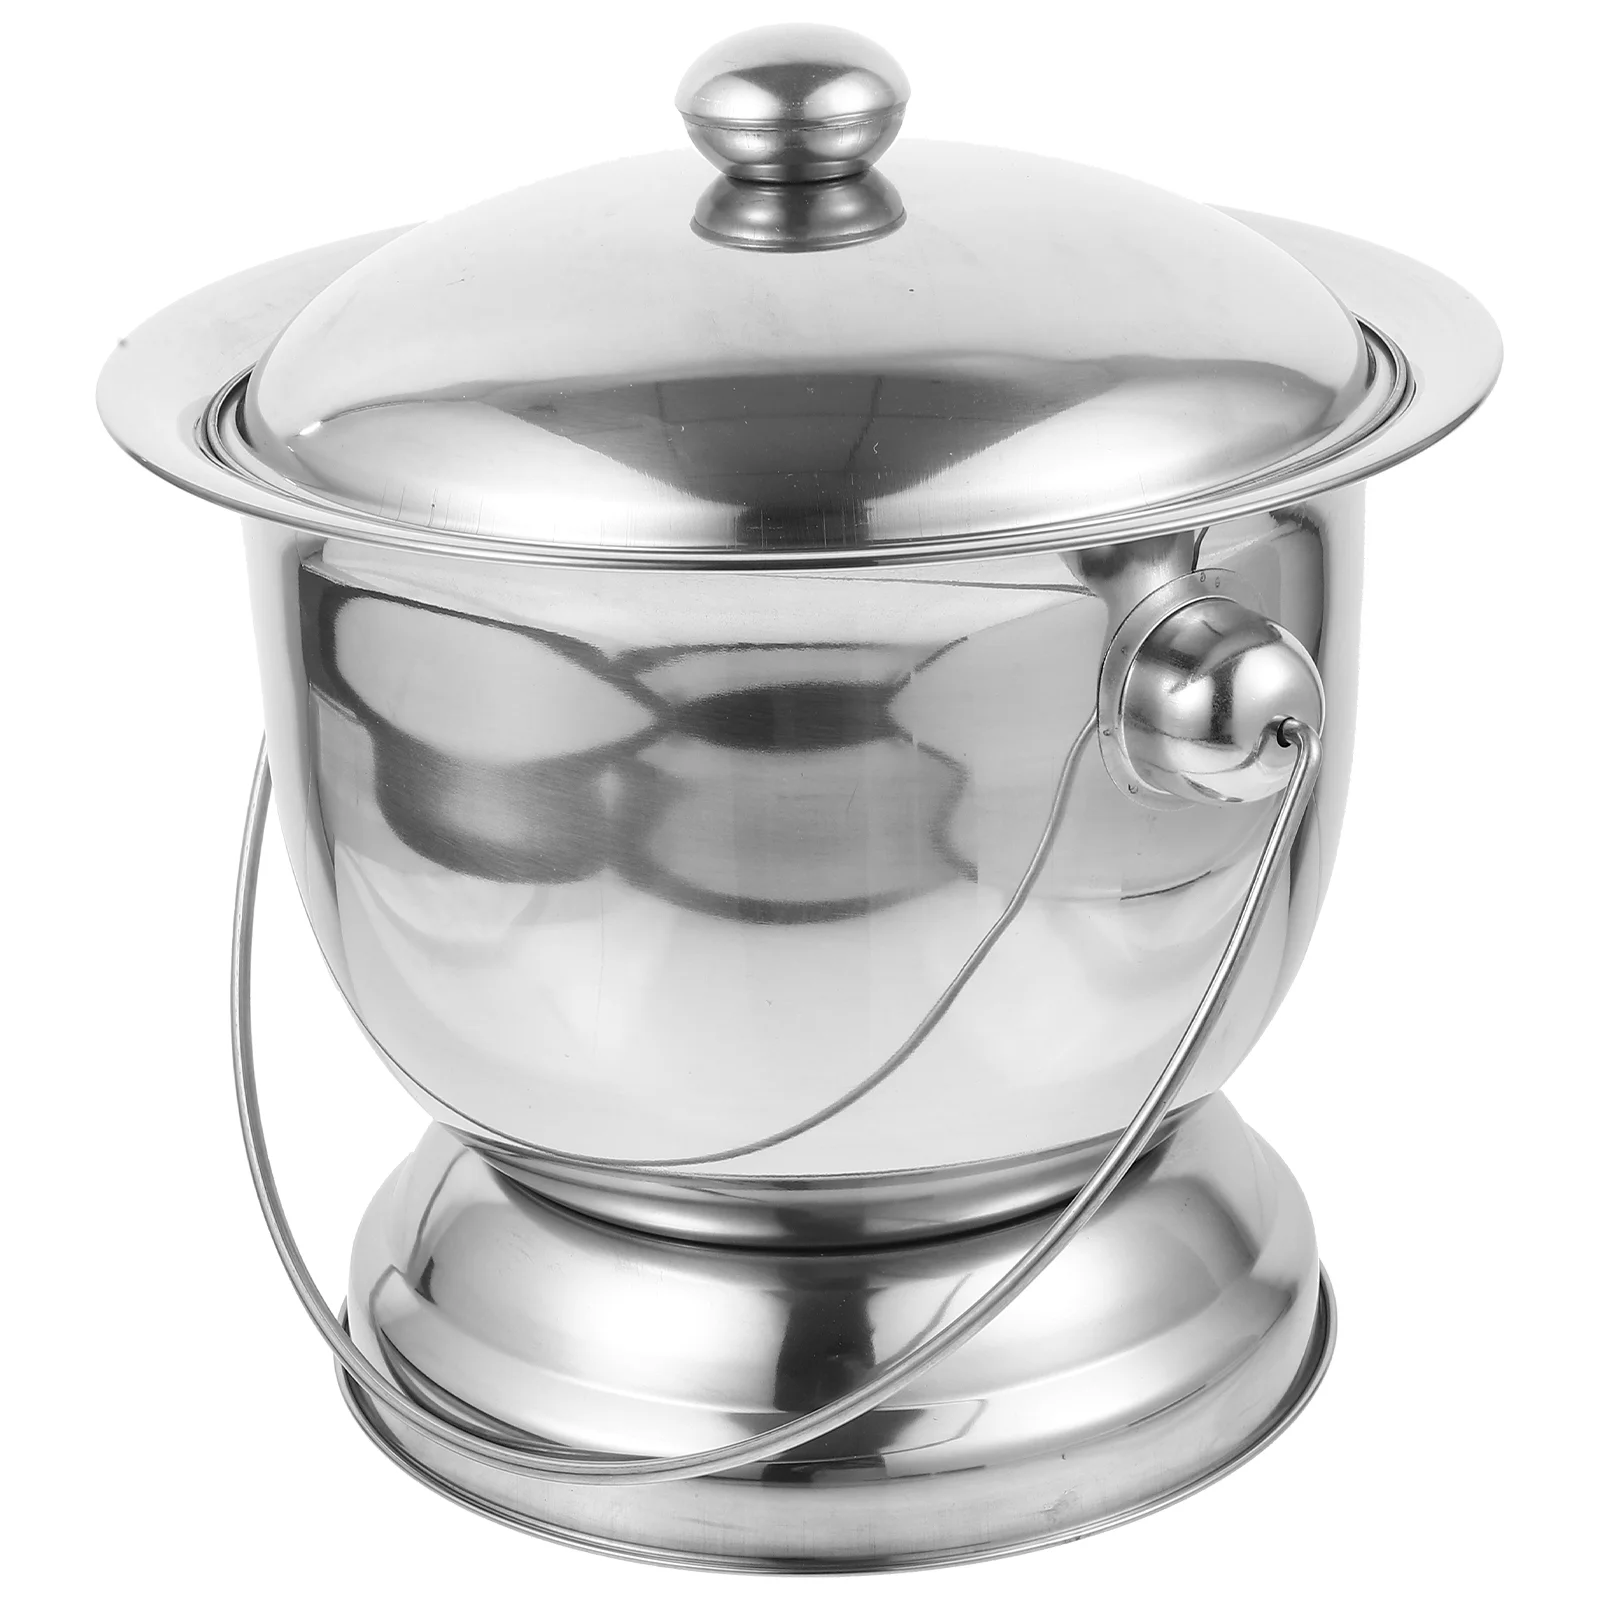 

Stainless Steel Urine Bucket Metal Spittoon Urinal Commode Patient Care Accessories Potty Bedpan Chamber with Lid